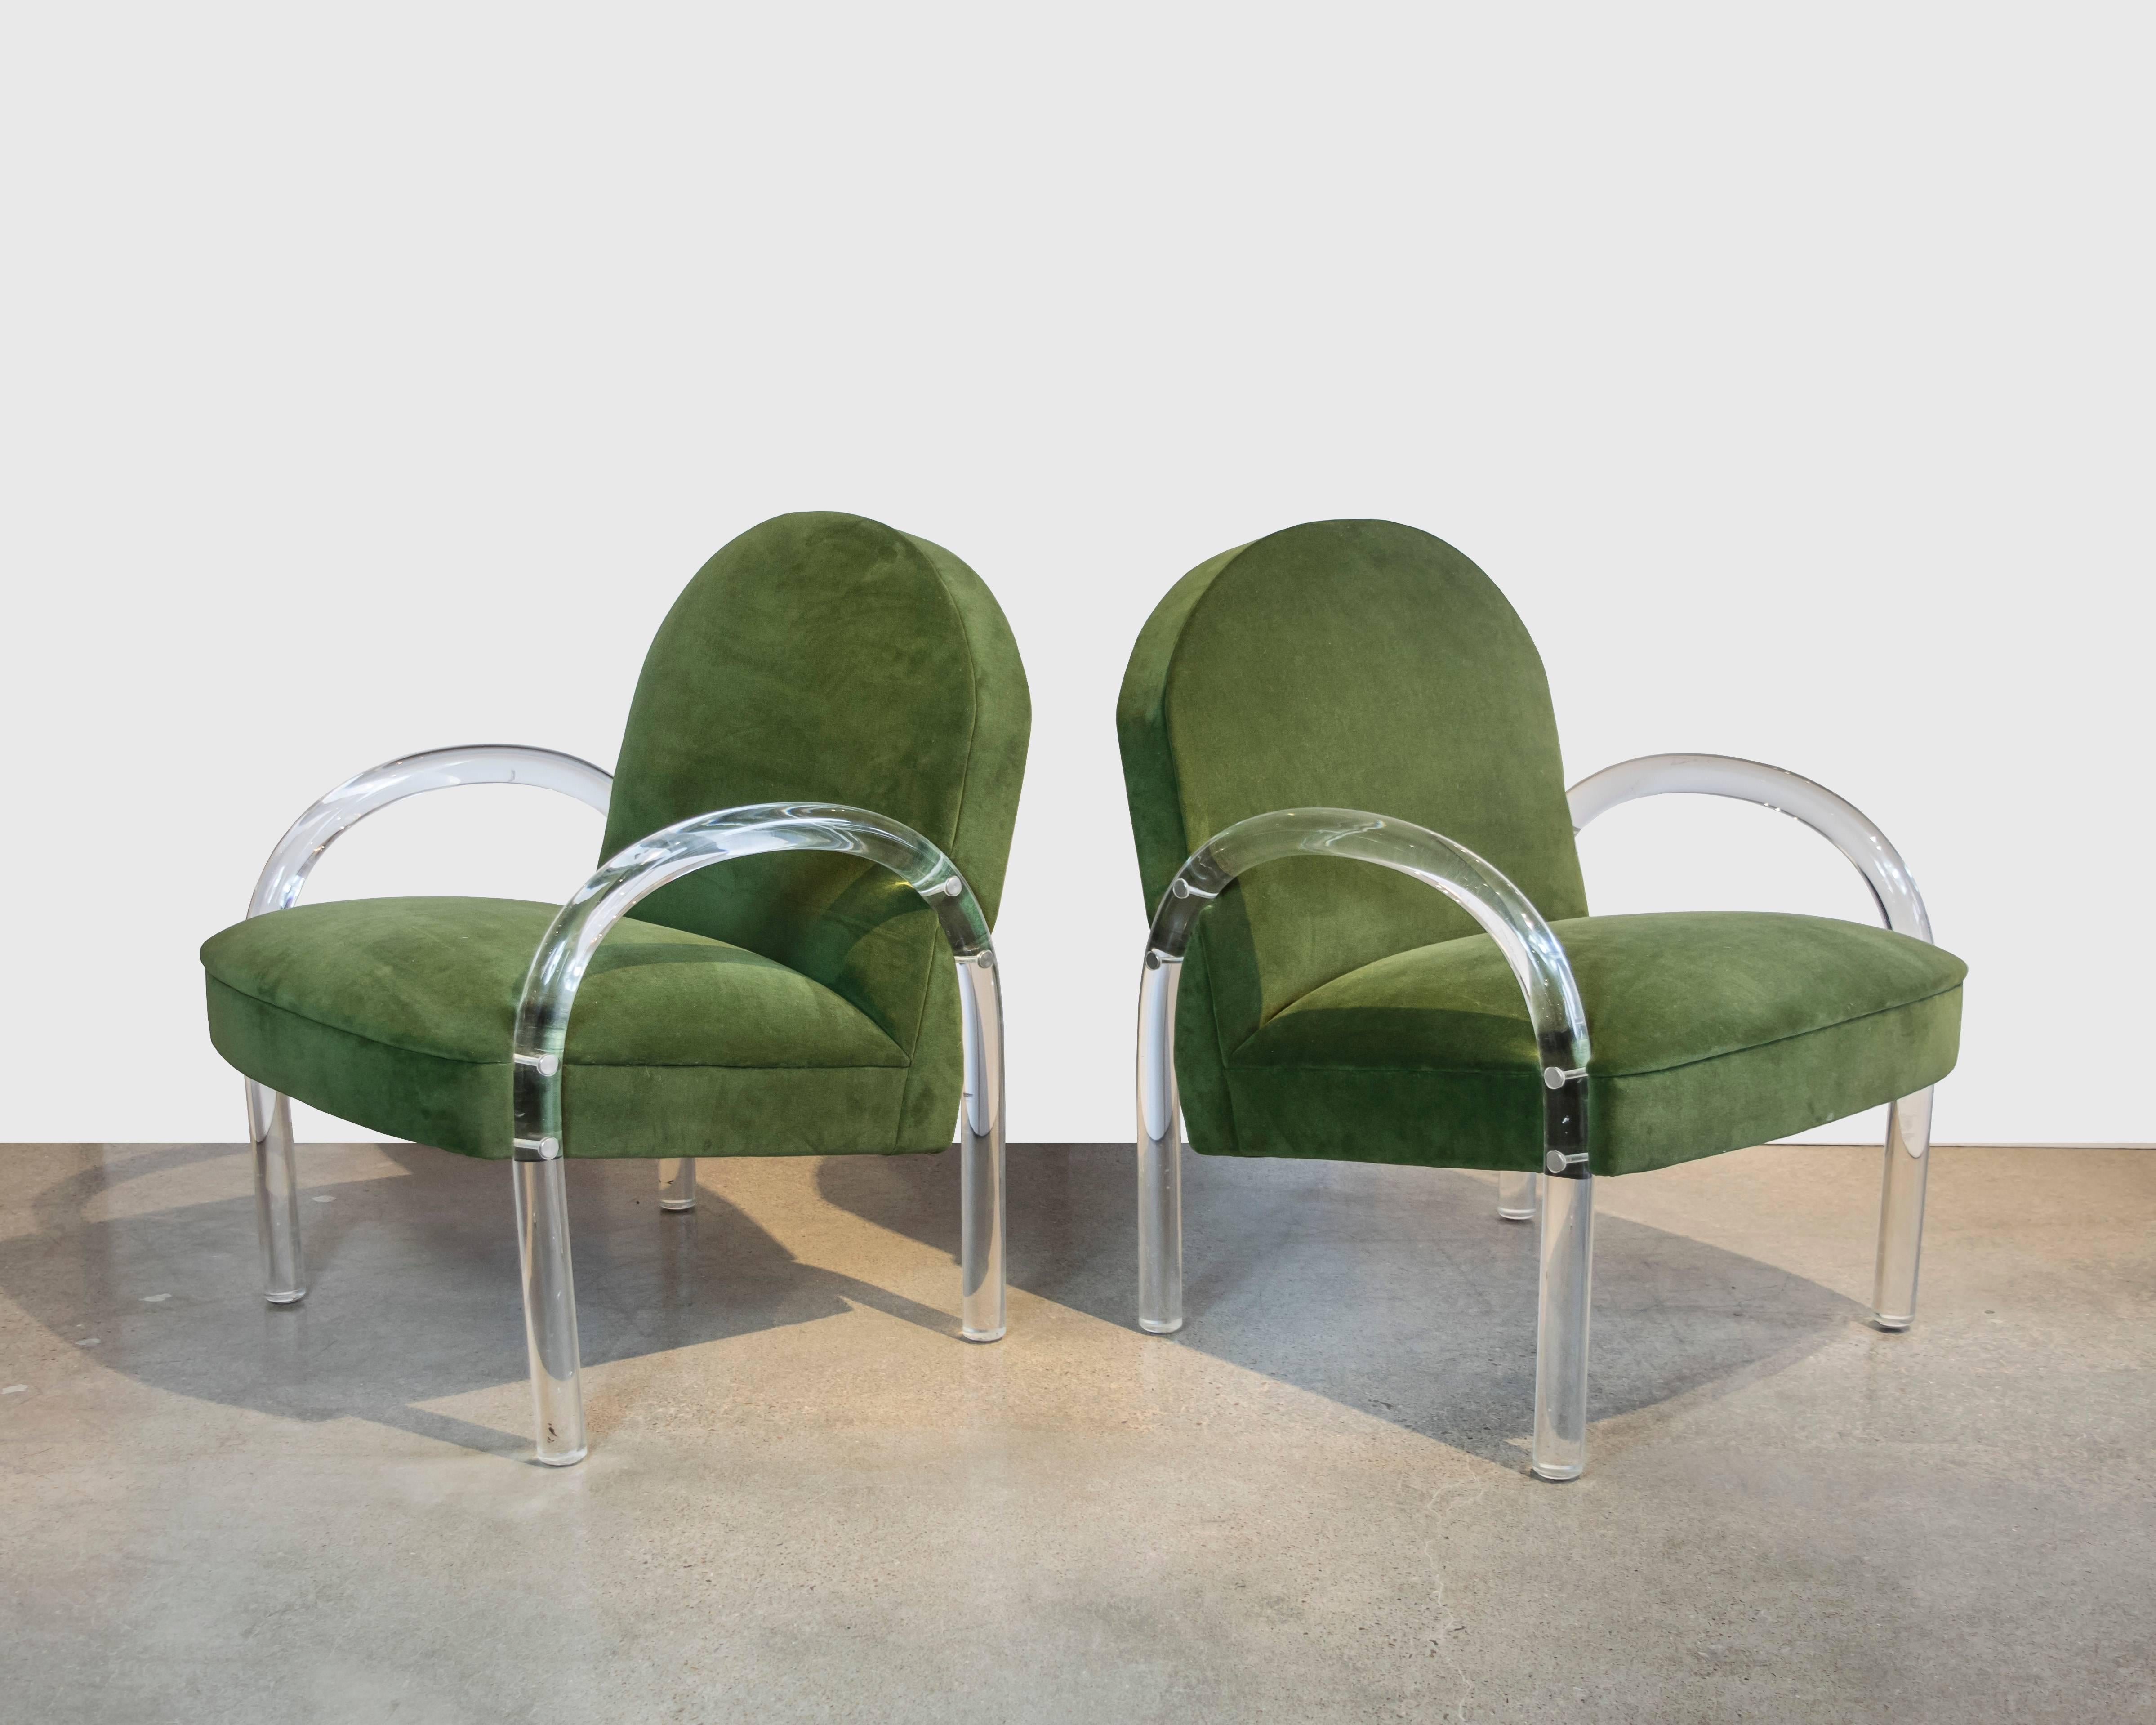 Exceptional pair of Pace Lucite lounge chairs recently upholstered in Loden green velvet.